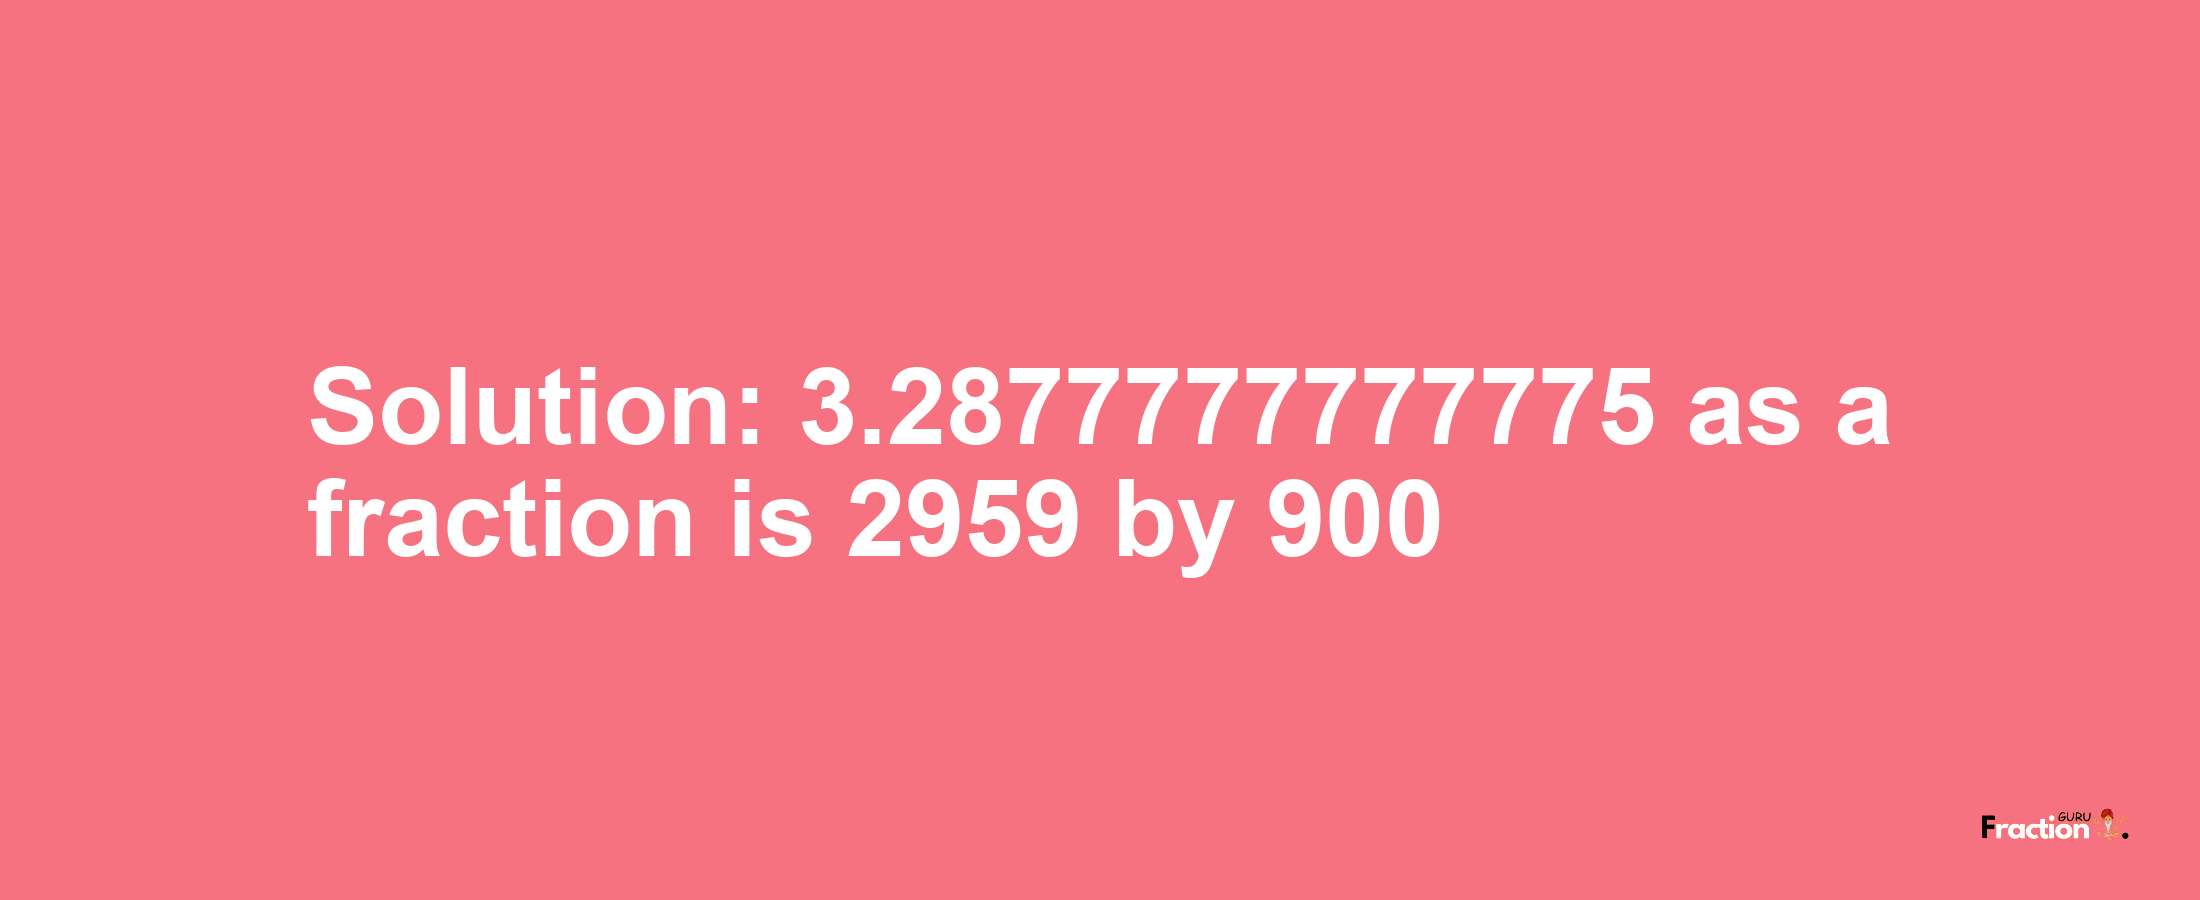 Solution:3.2877777777775 as a fraction is 2959/900